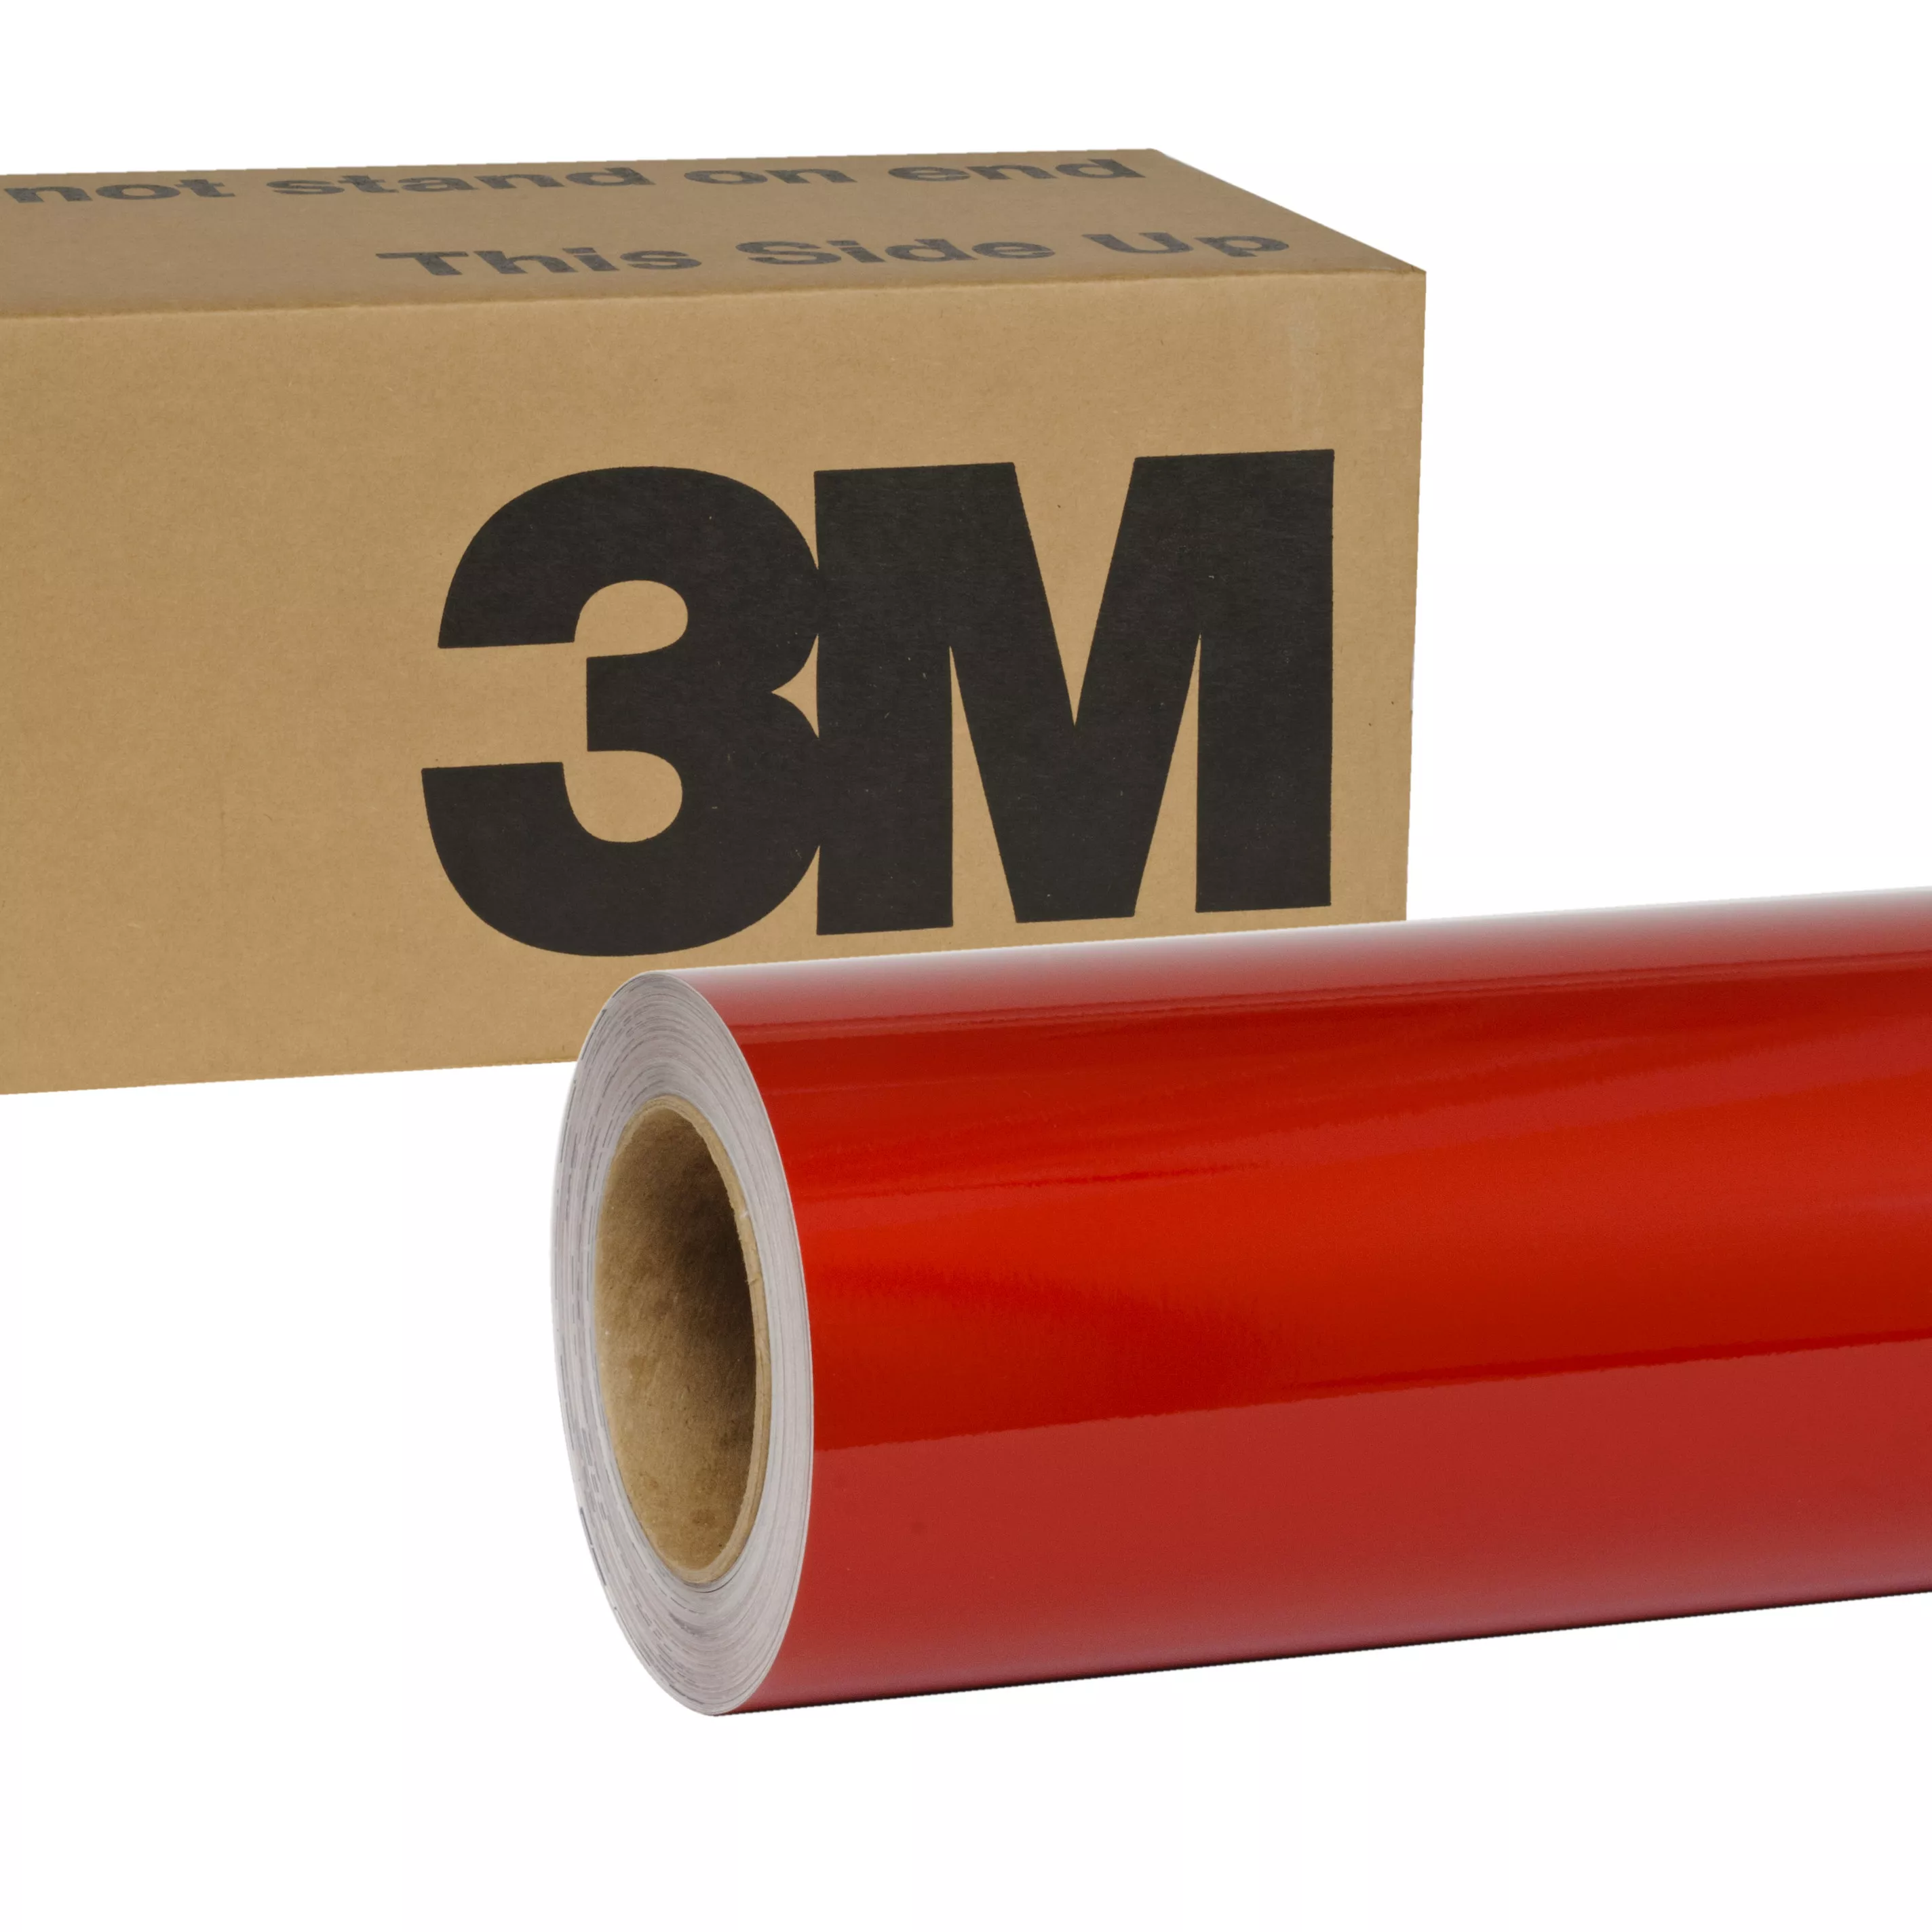 3M™ Wrap Film Series 1080-G363, Gloss Dragon Fire Red, 60 in x 10 yd